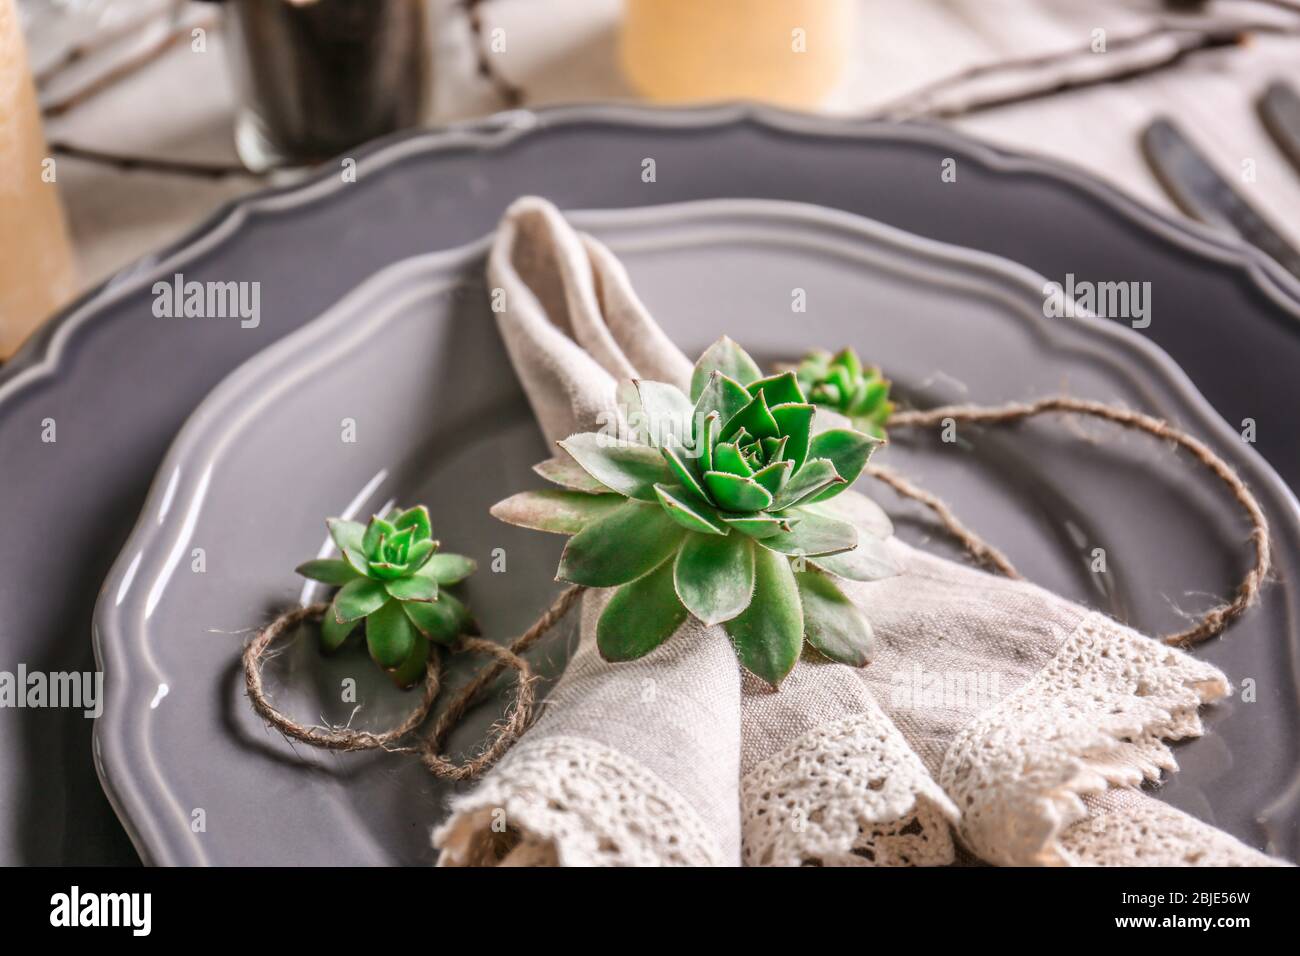 Table served with succulents on plate Stock Photo